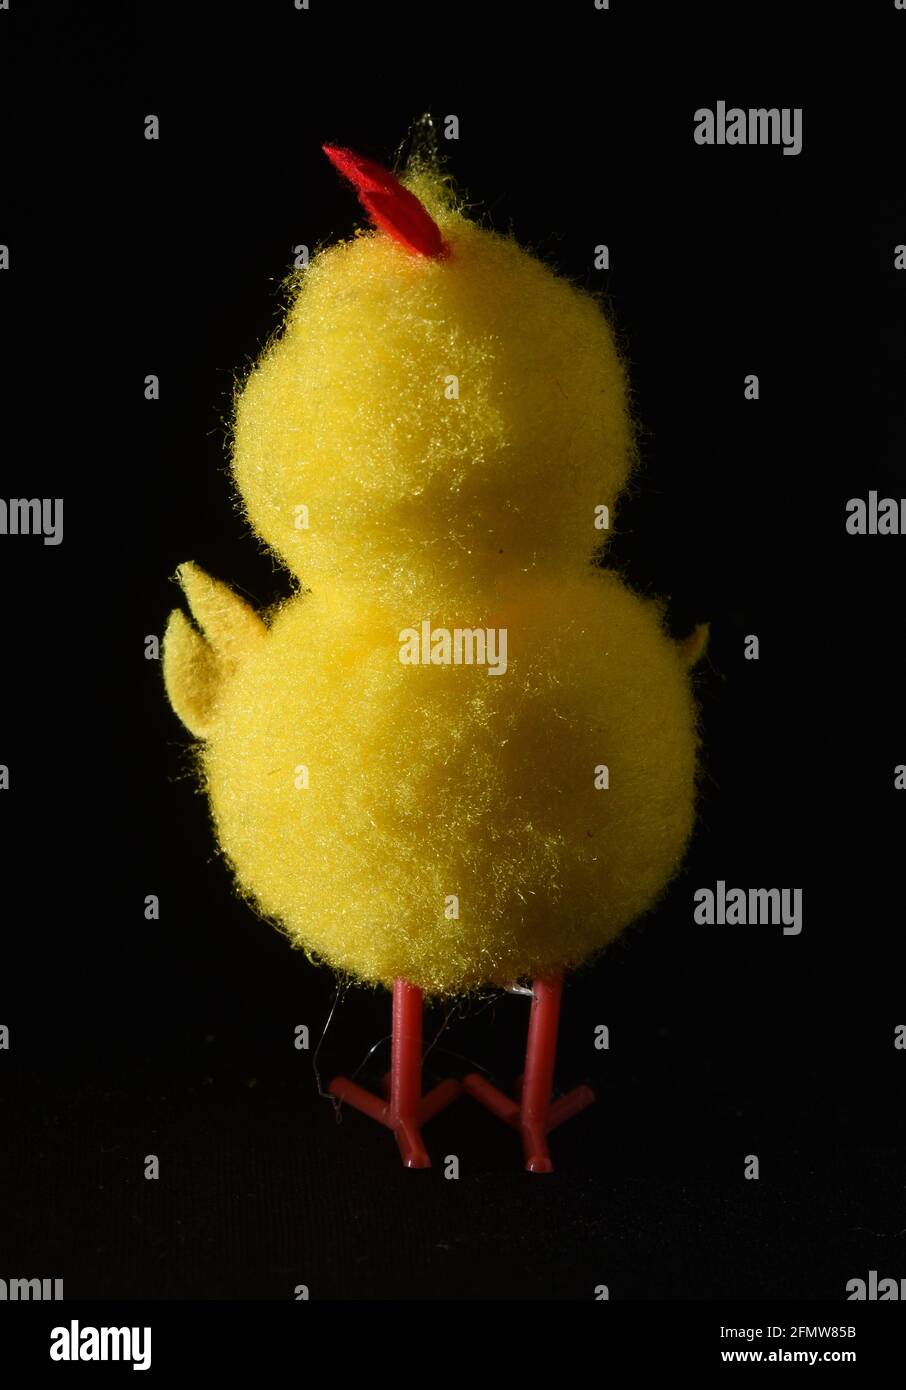 A still life studio vertical image on a black background of the rear view of a yellow fuzzy toy baby chick, an Easter toy Stock Photo